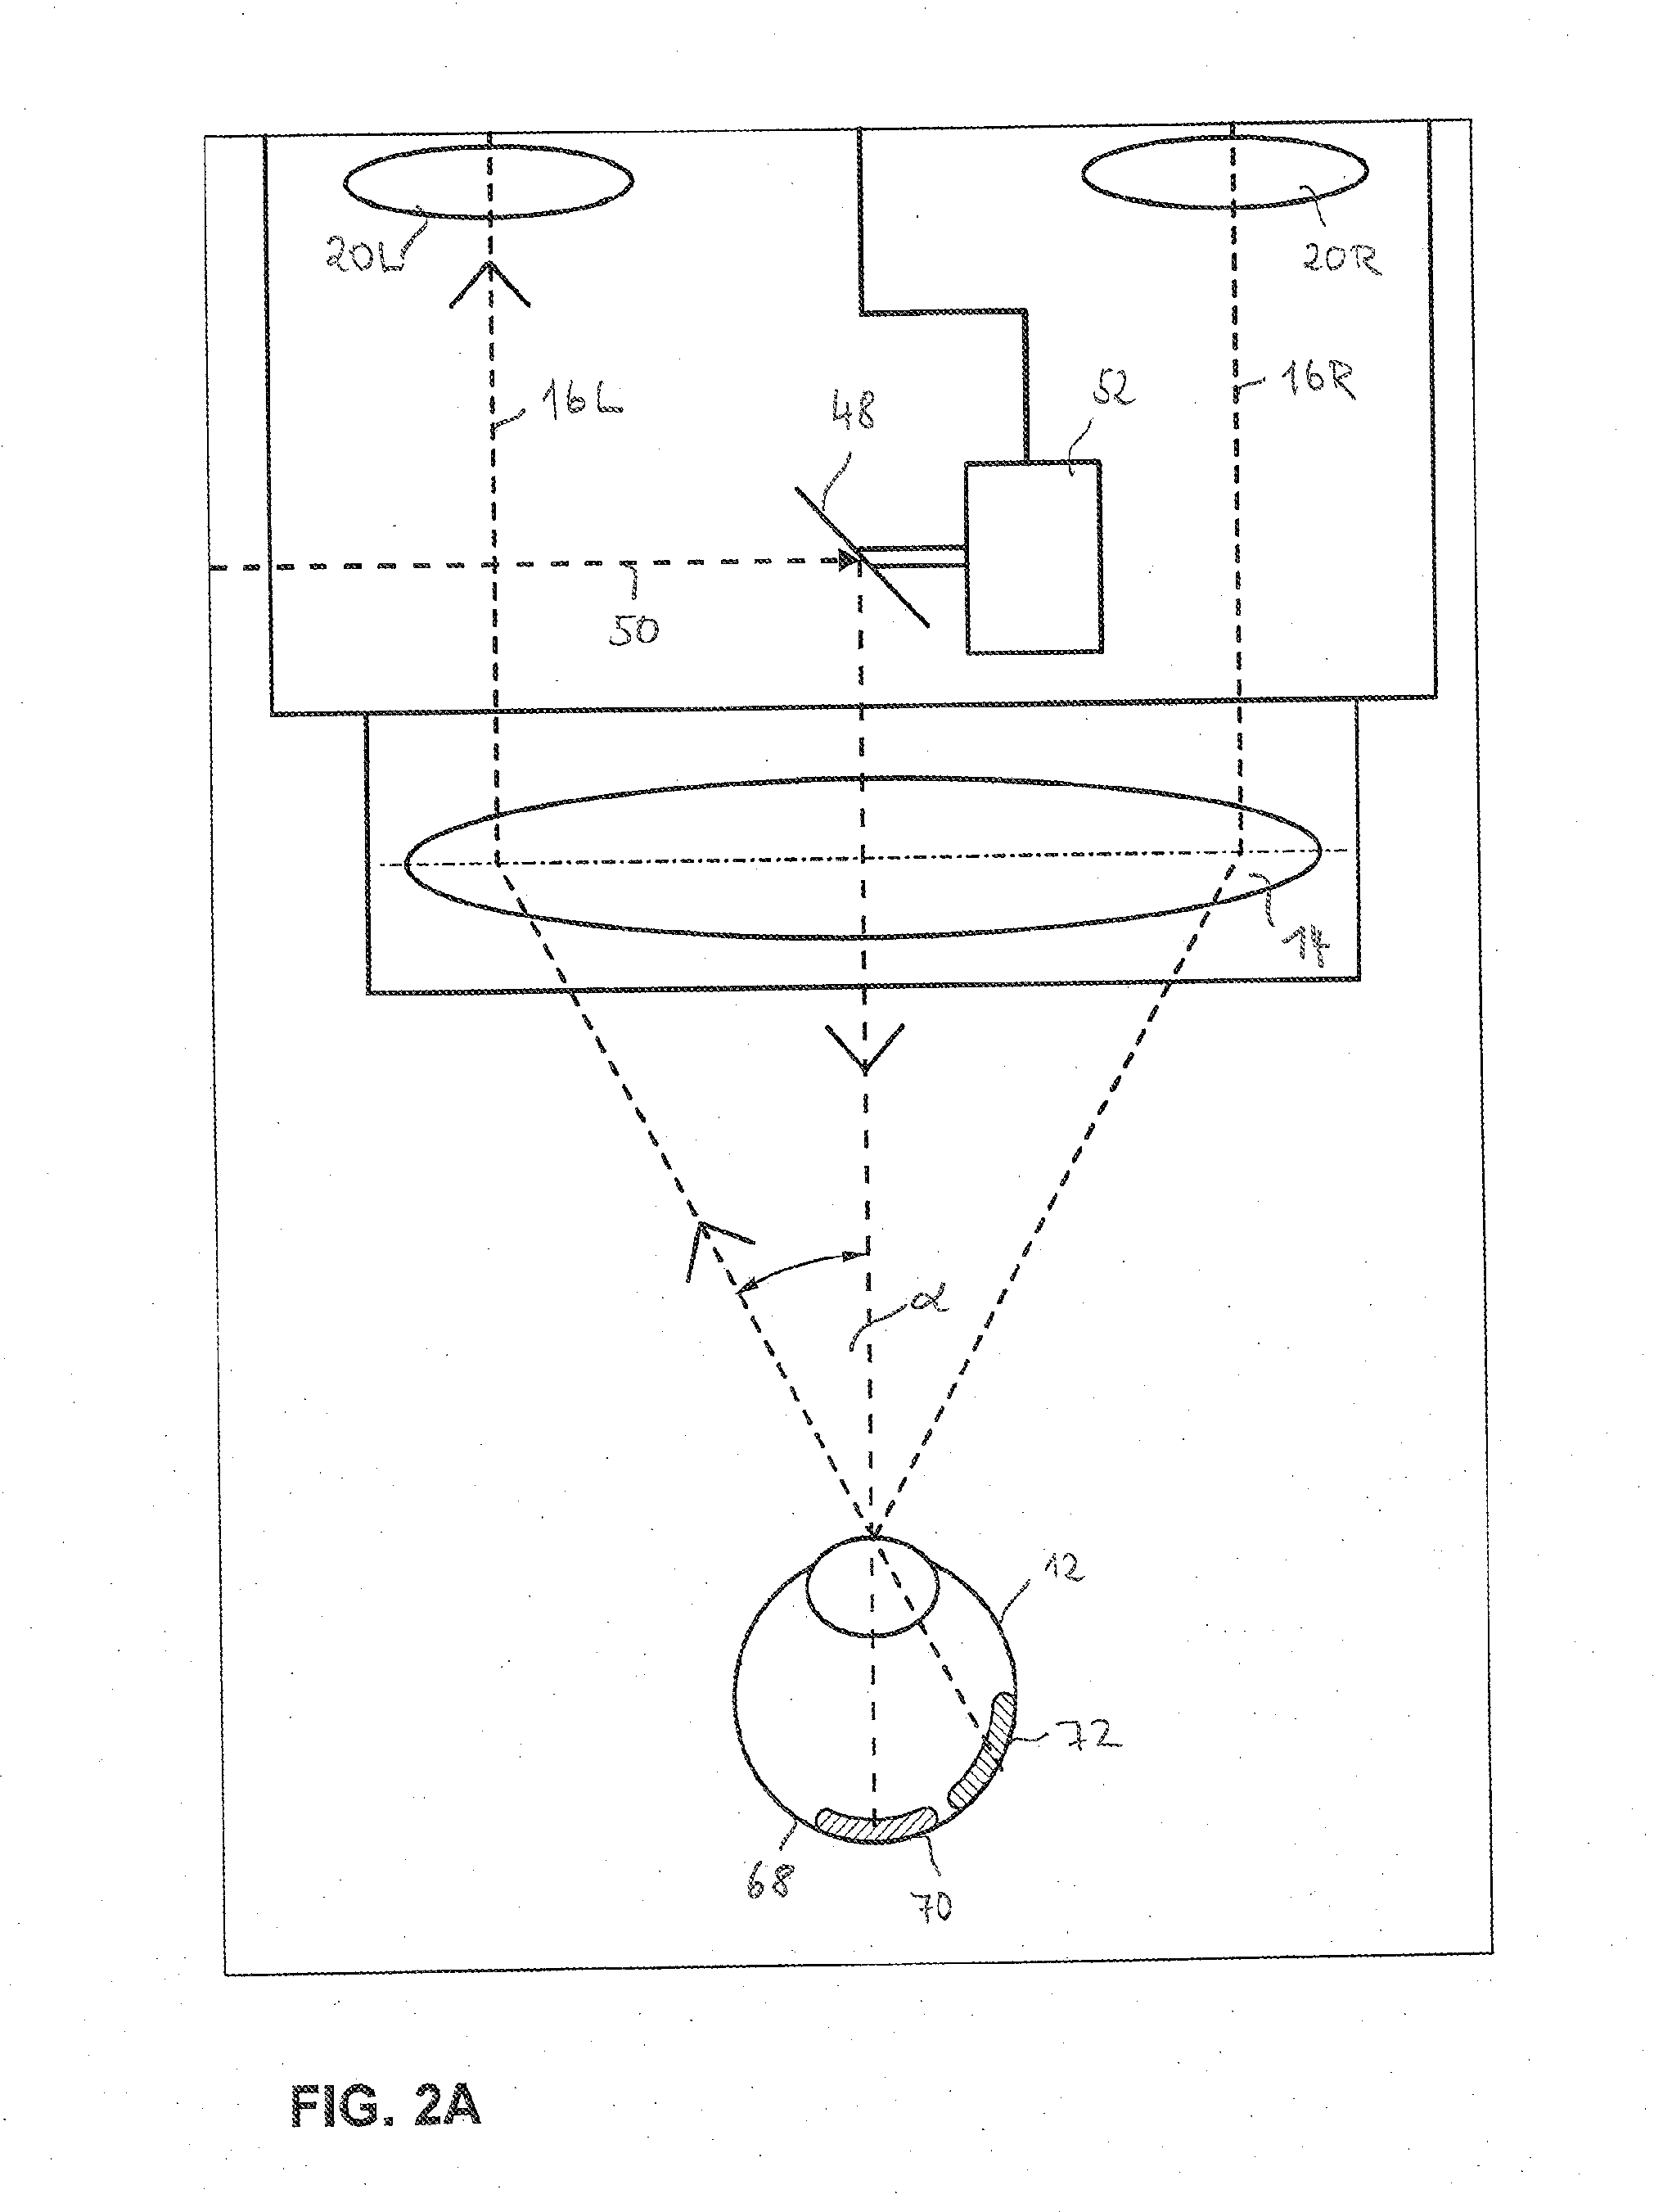 Illumination System for an Ophthalmic Surgical Microscope, Ophthalmic Surgical Microscope, and Method for Operating an Illumination System for an Ophthalmic Surgical Microscope